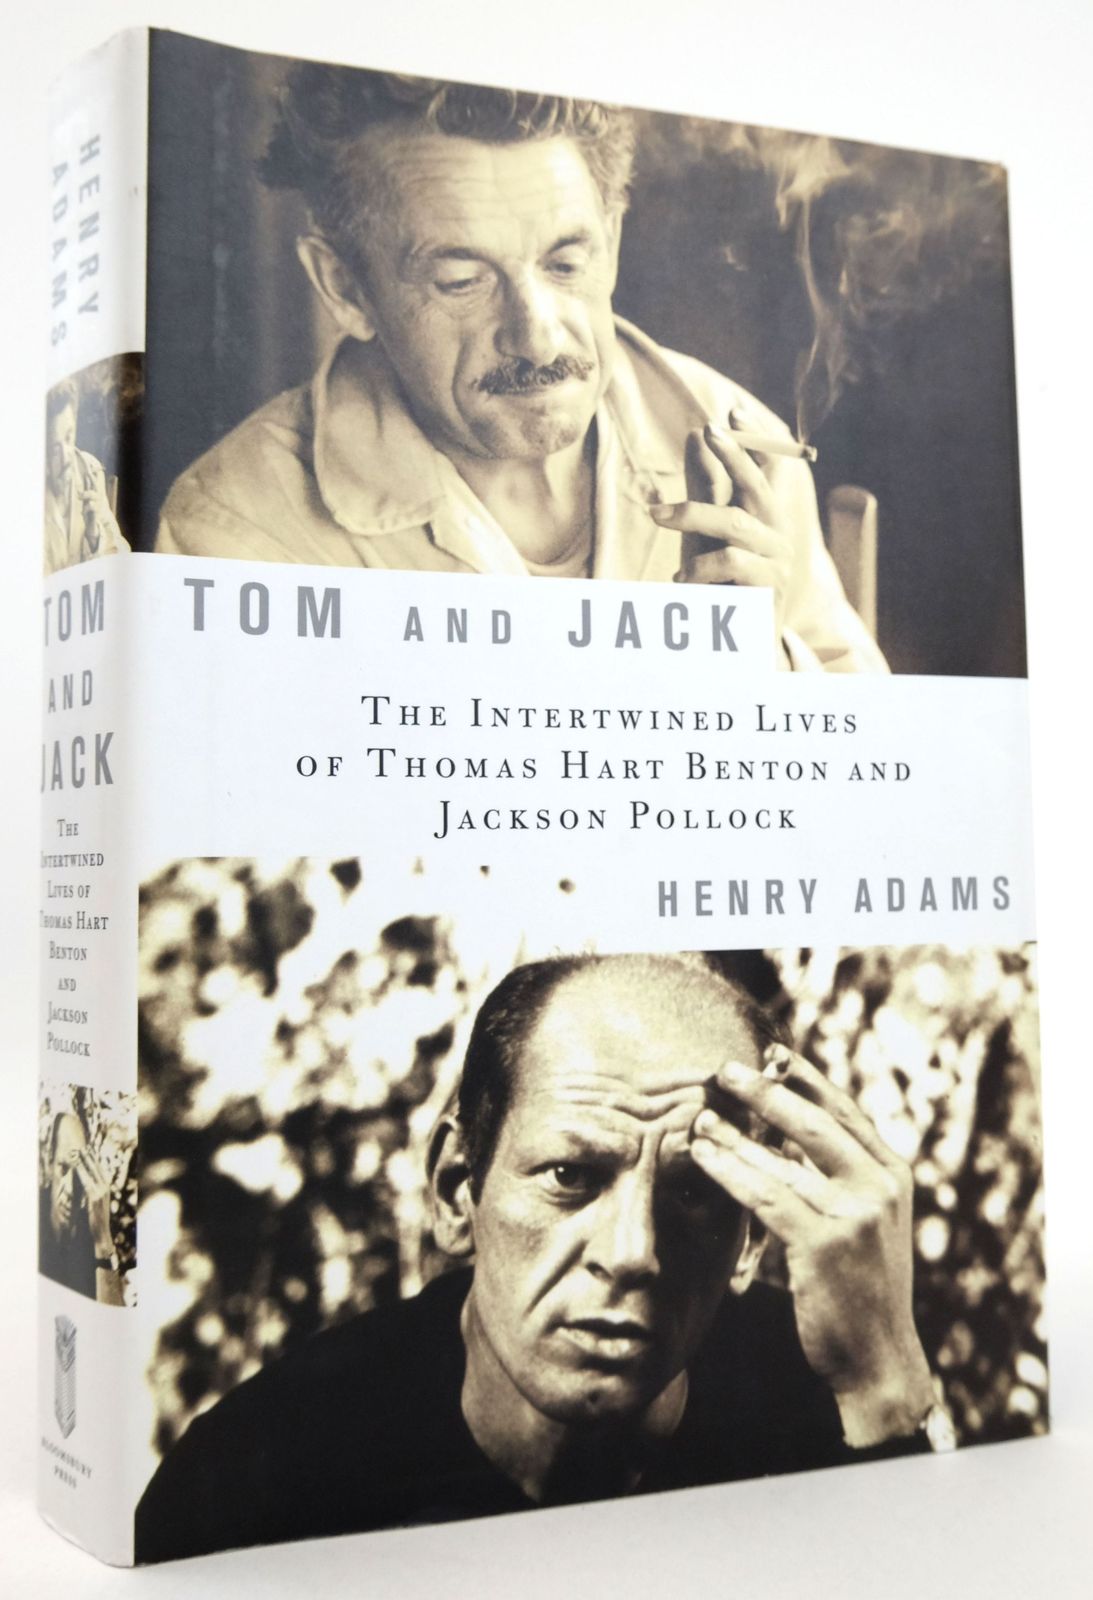 Photo of TOM AND JACK written by Adams, Henry published by Bloomsbury Press (STOCK CODE: 1819300)  for sale by Stella & Rose's Books